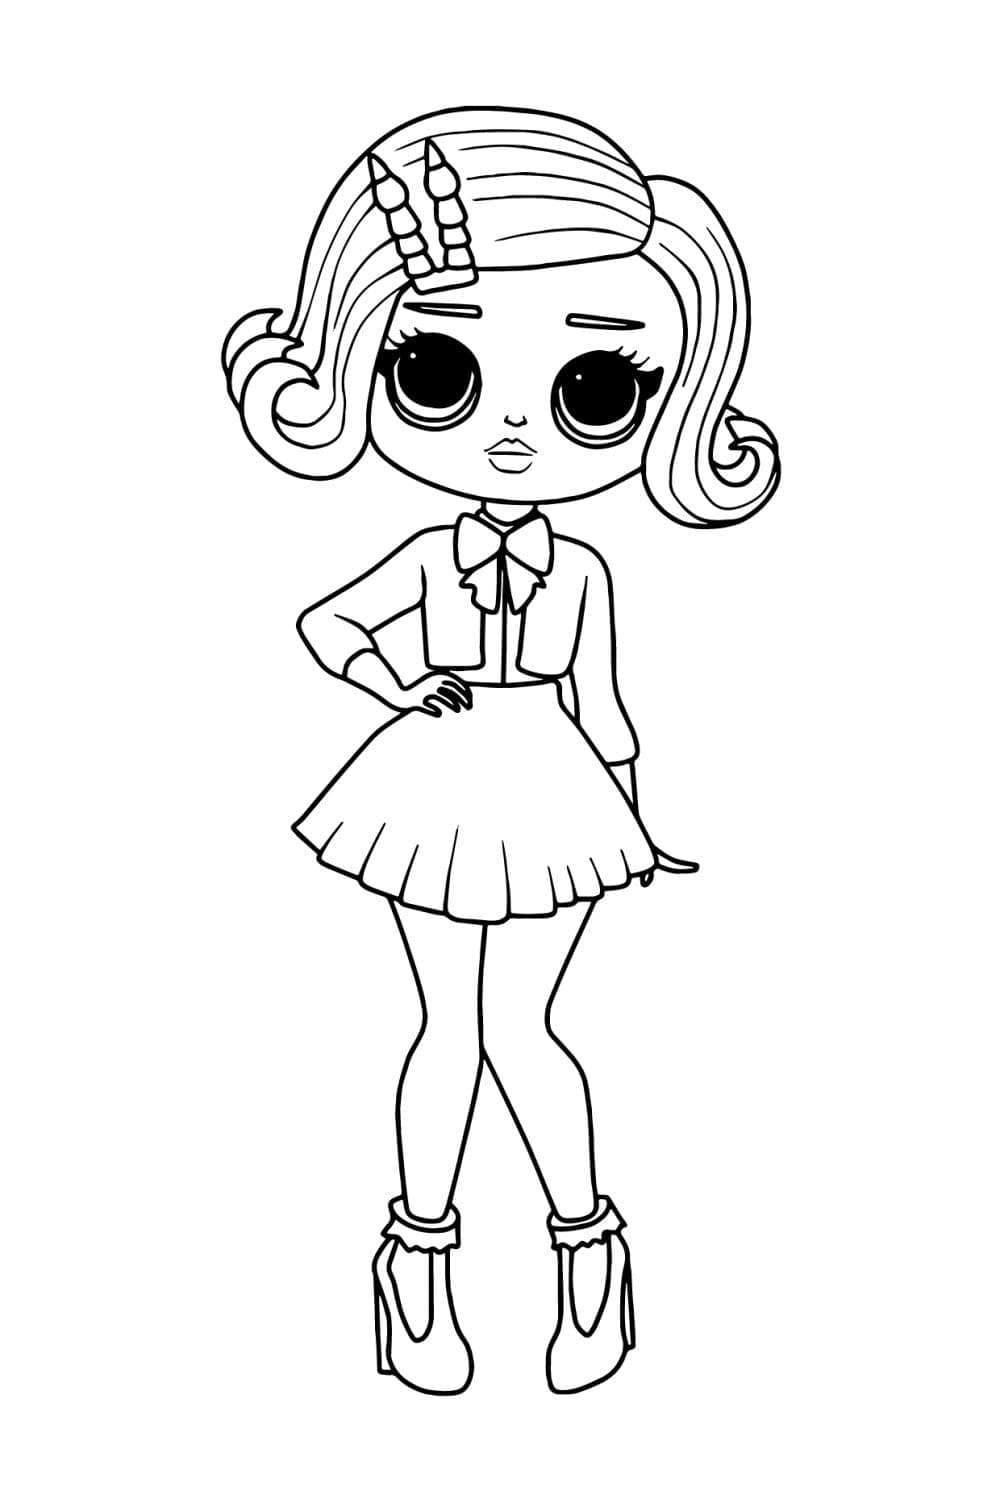 LOL OMG Aristocrat Girl Image Coloring Page